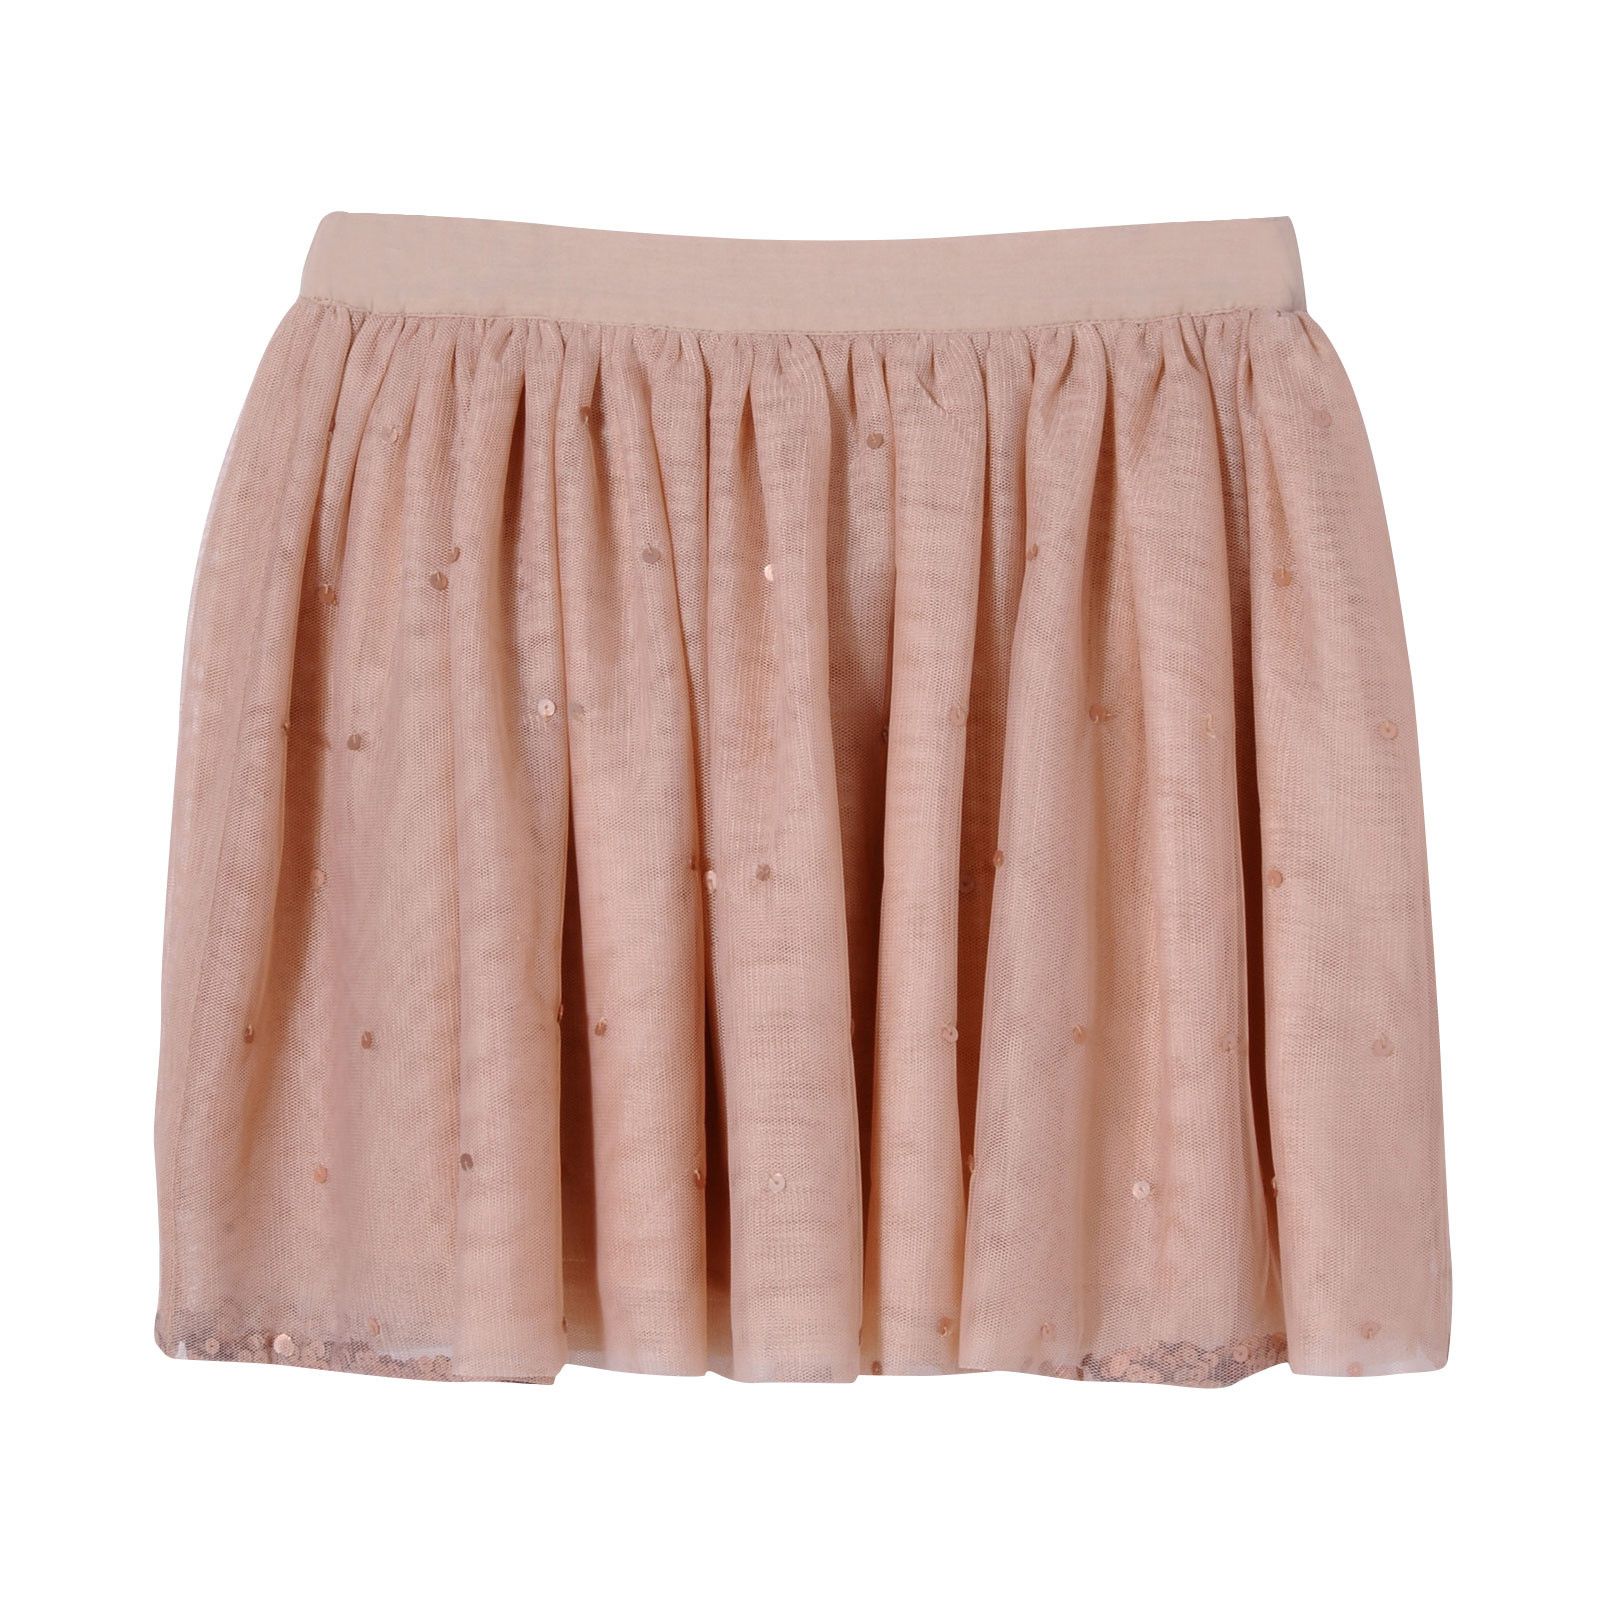 Girls Pink Scattered Sequins Trims Tulle Party Skirt - CÉMAROSE | Children's Fashion Store - 1